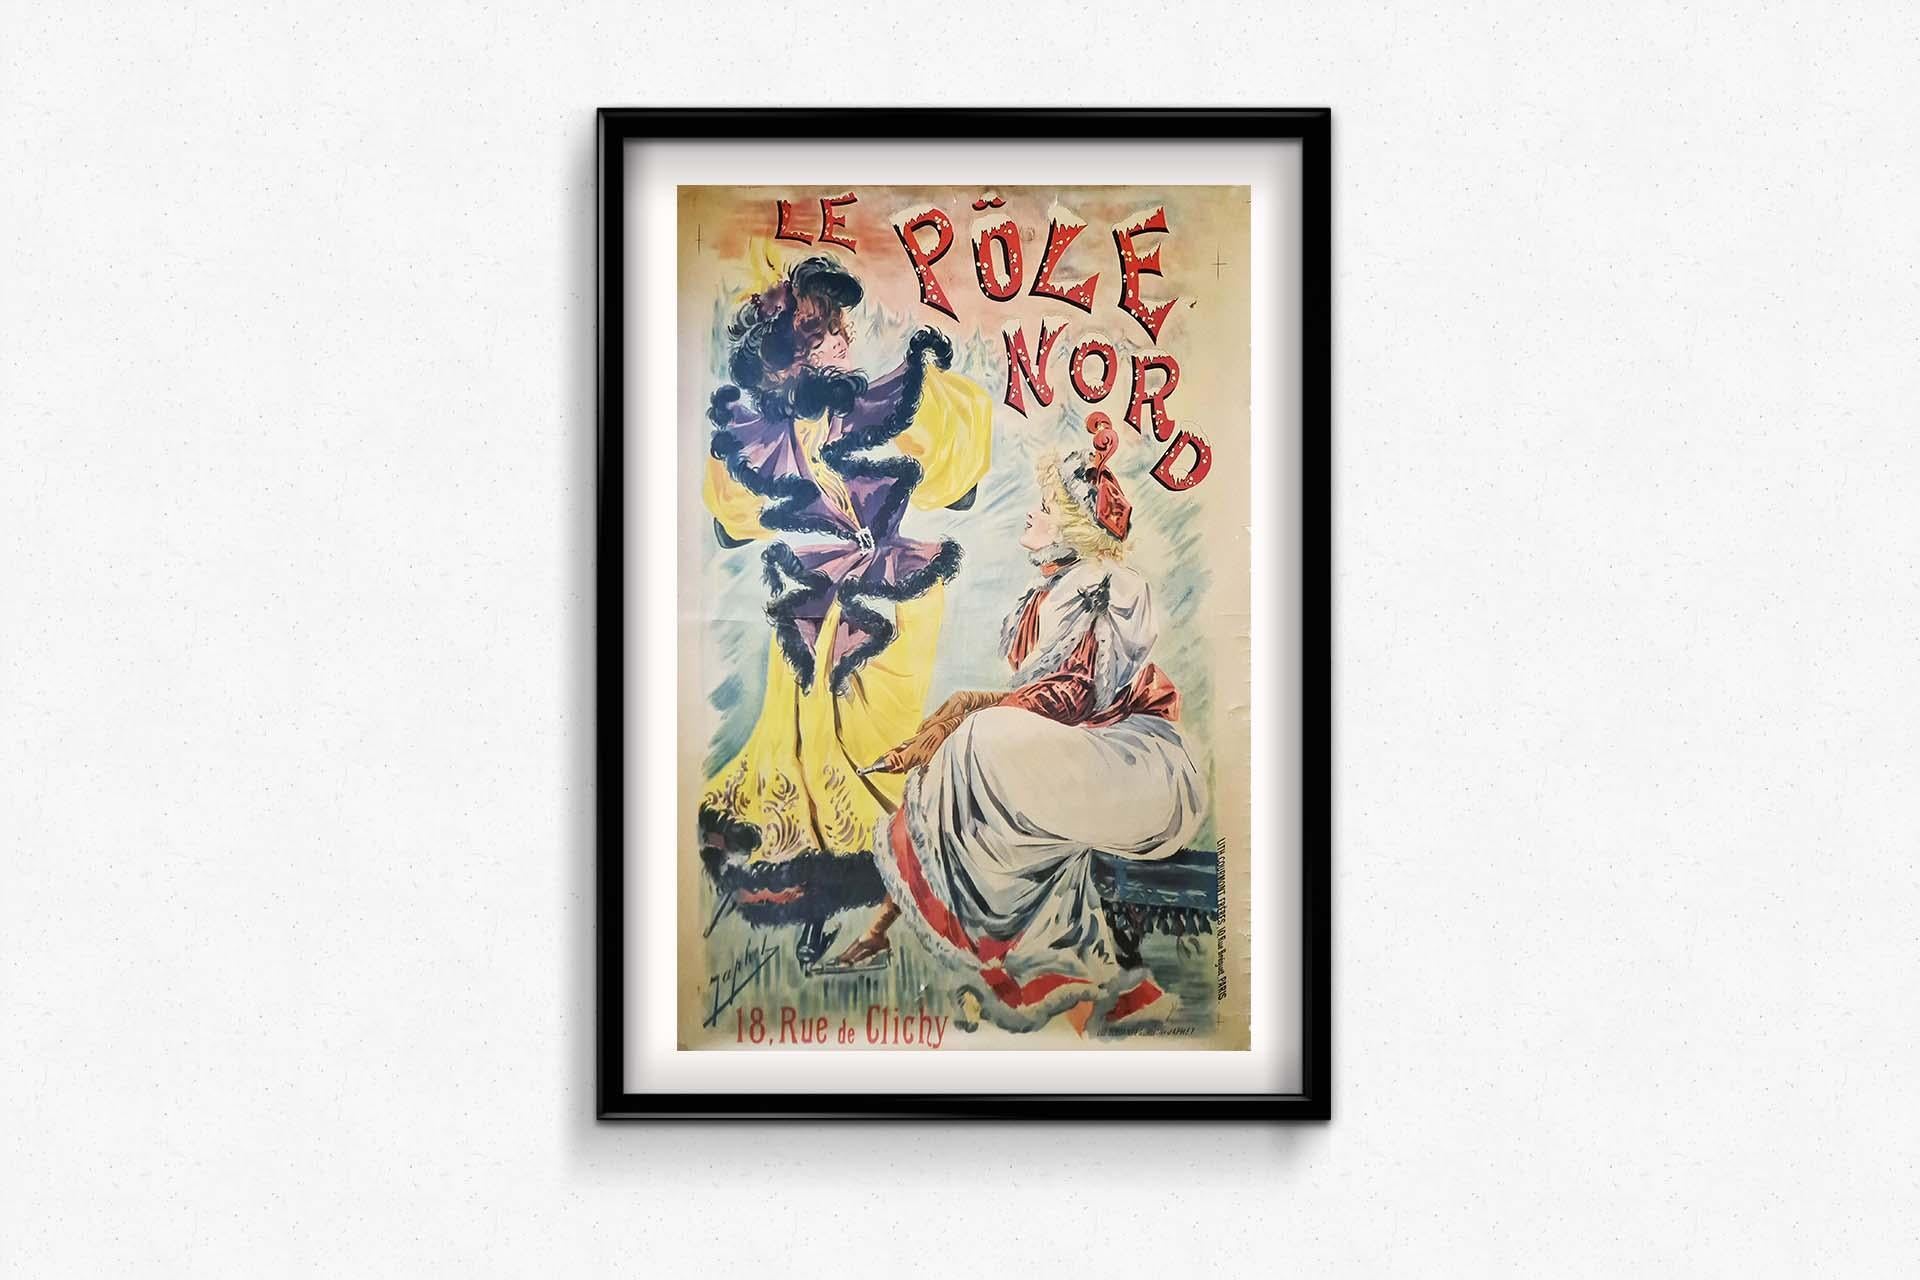 1895 Original poster for the North Pole, the first artificial ice rink in Paris - Art Nouveau Print by Japhet